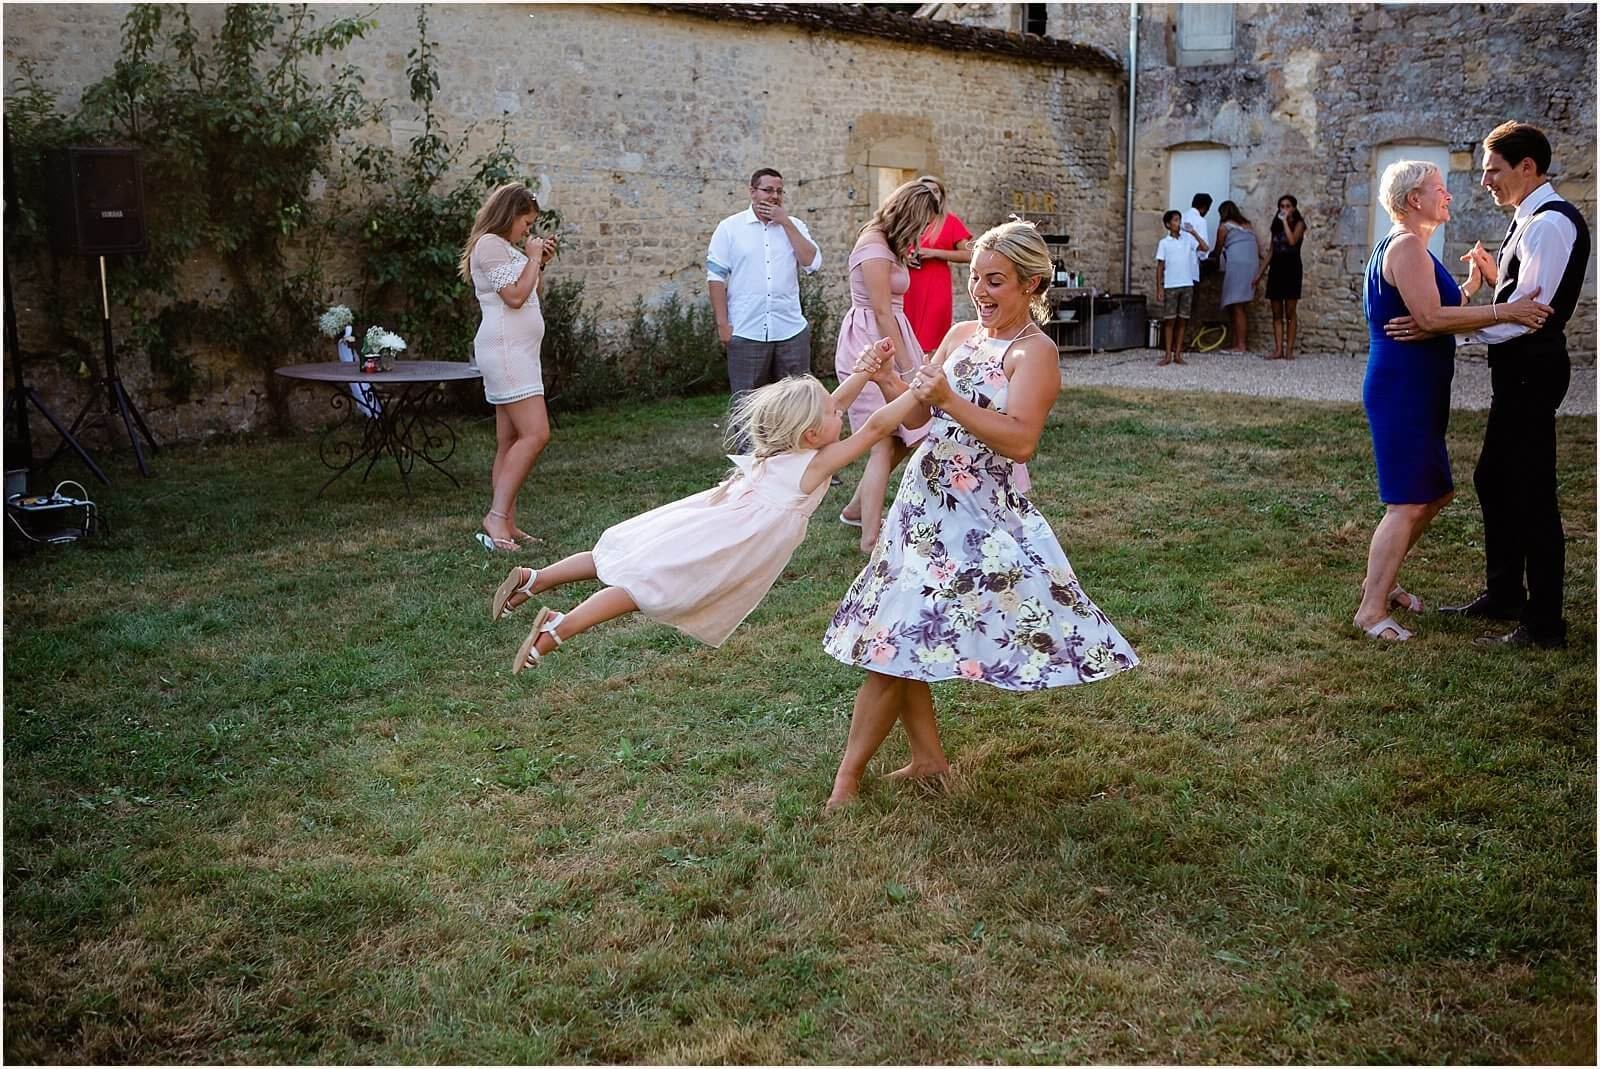 A woman and her daughter are playing  in the walled garden at a French chateau wedding.